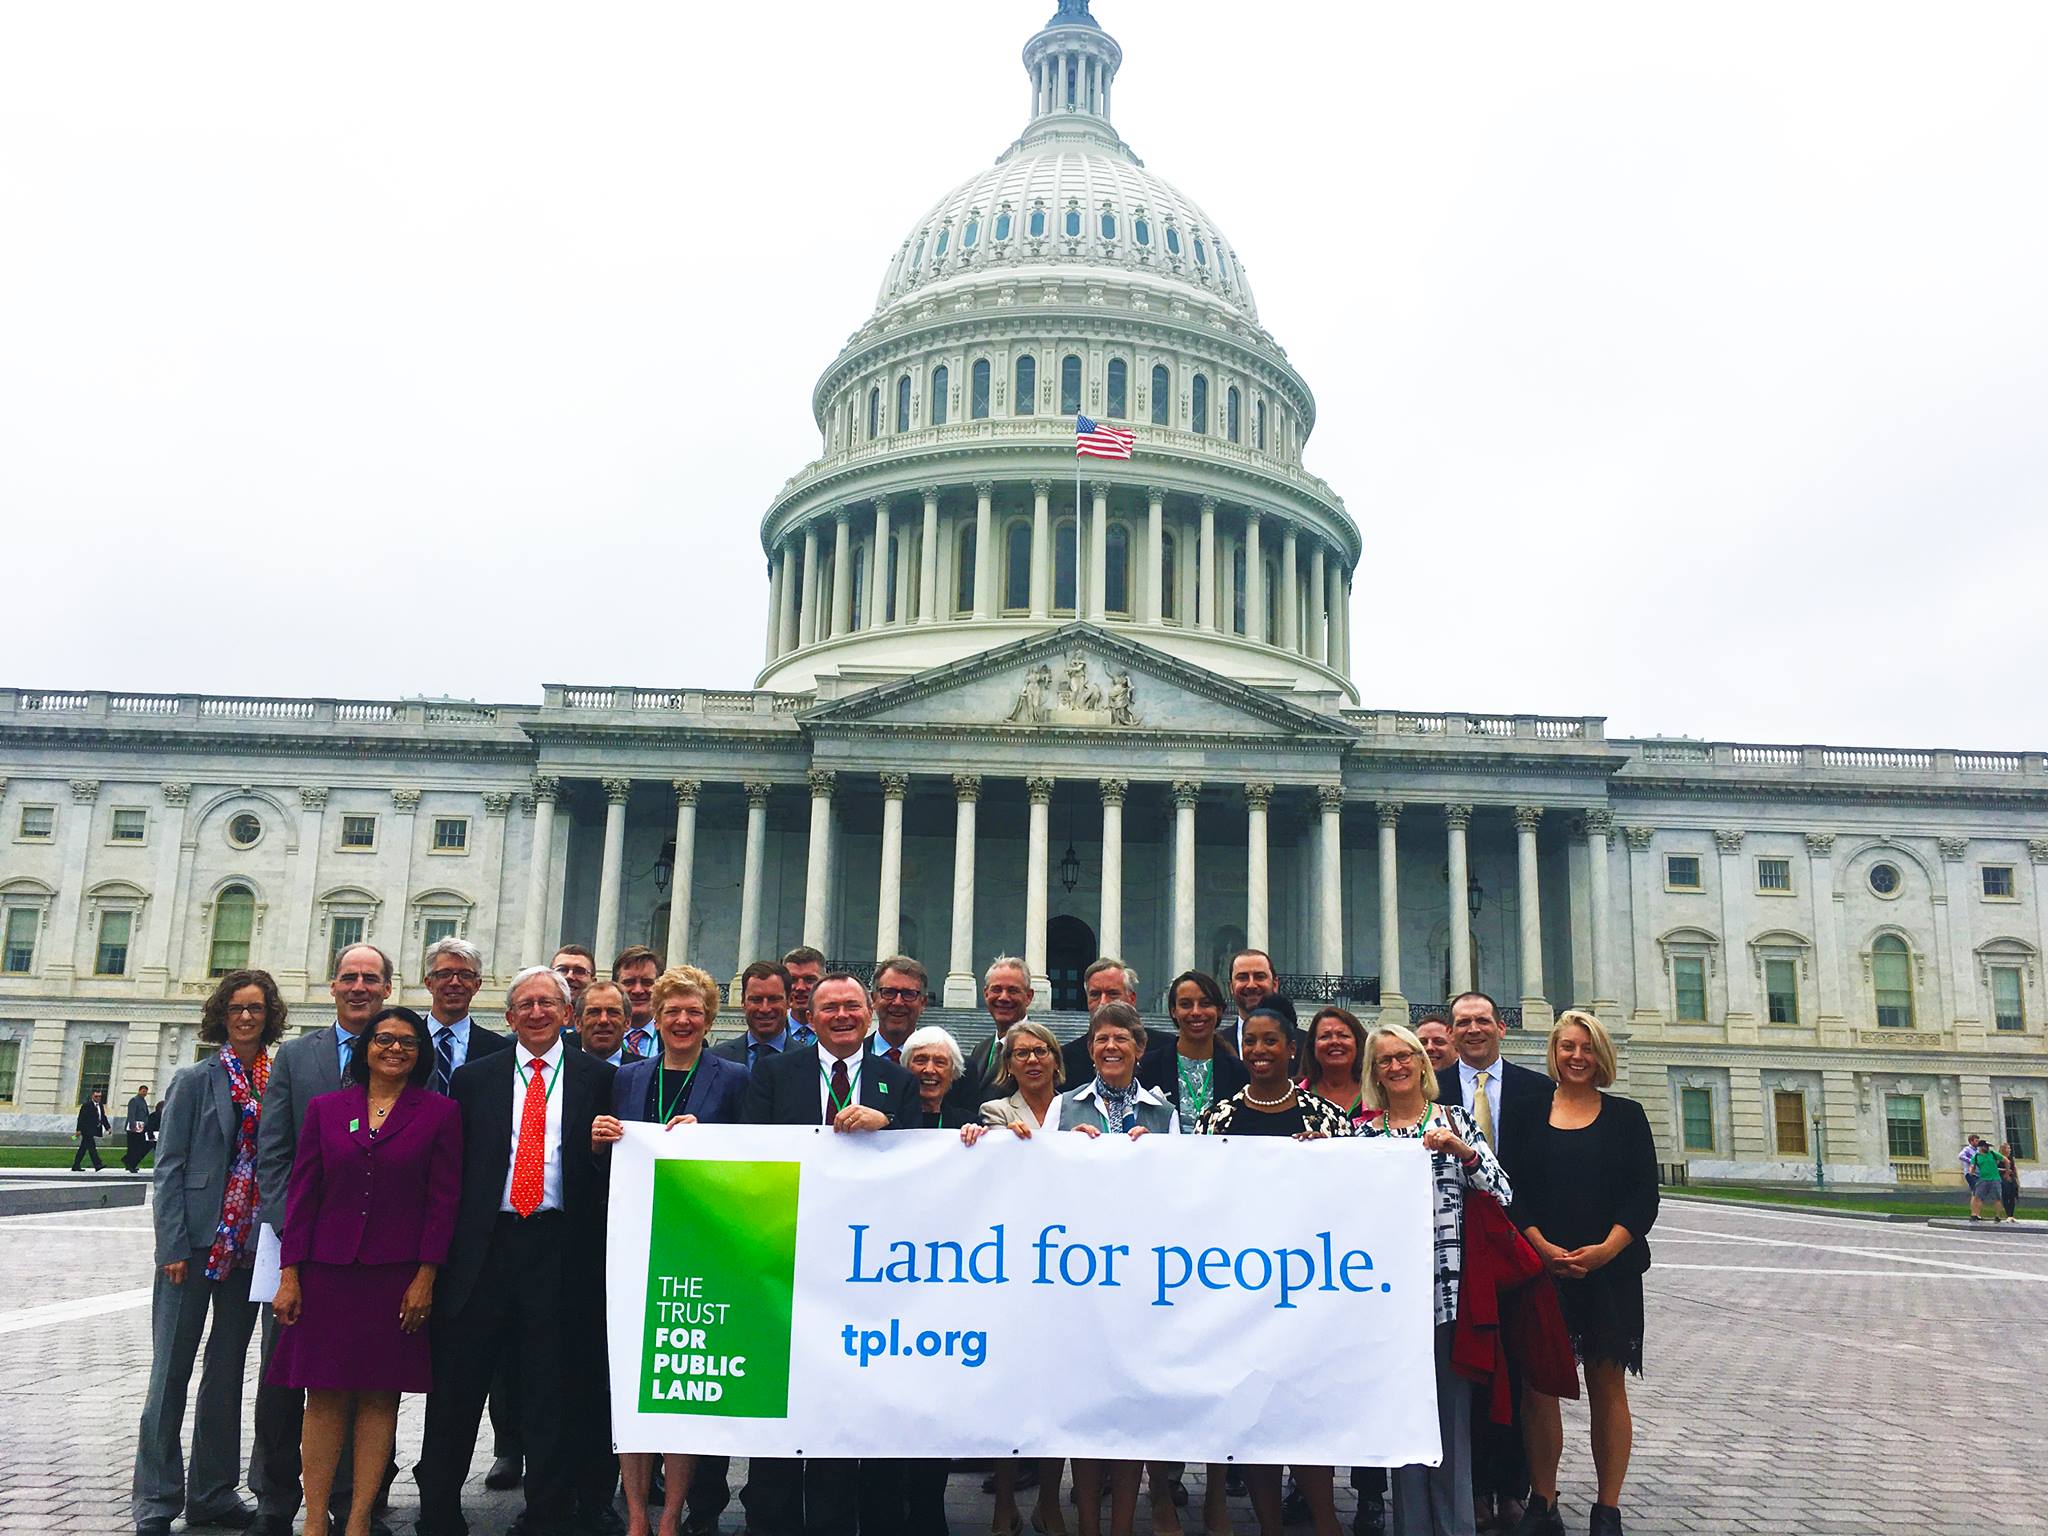 Trust for Public Land volunteers pose with a banner before the U.S. Capitol